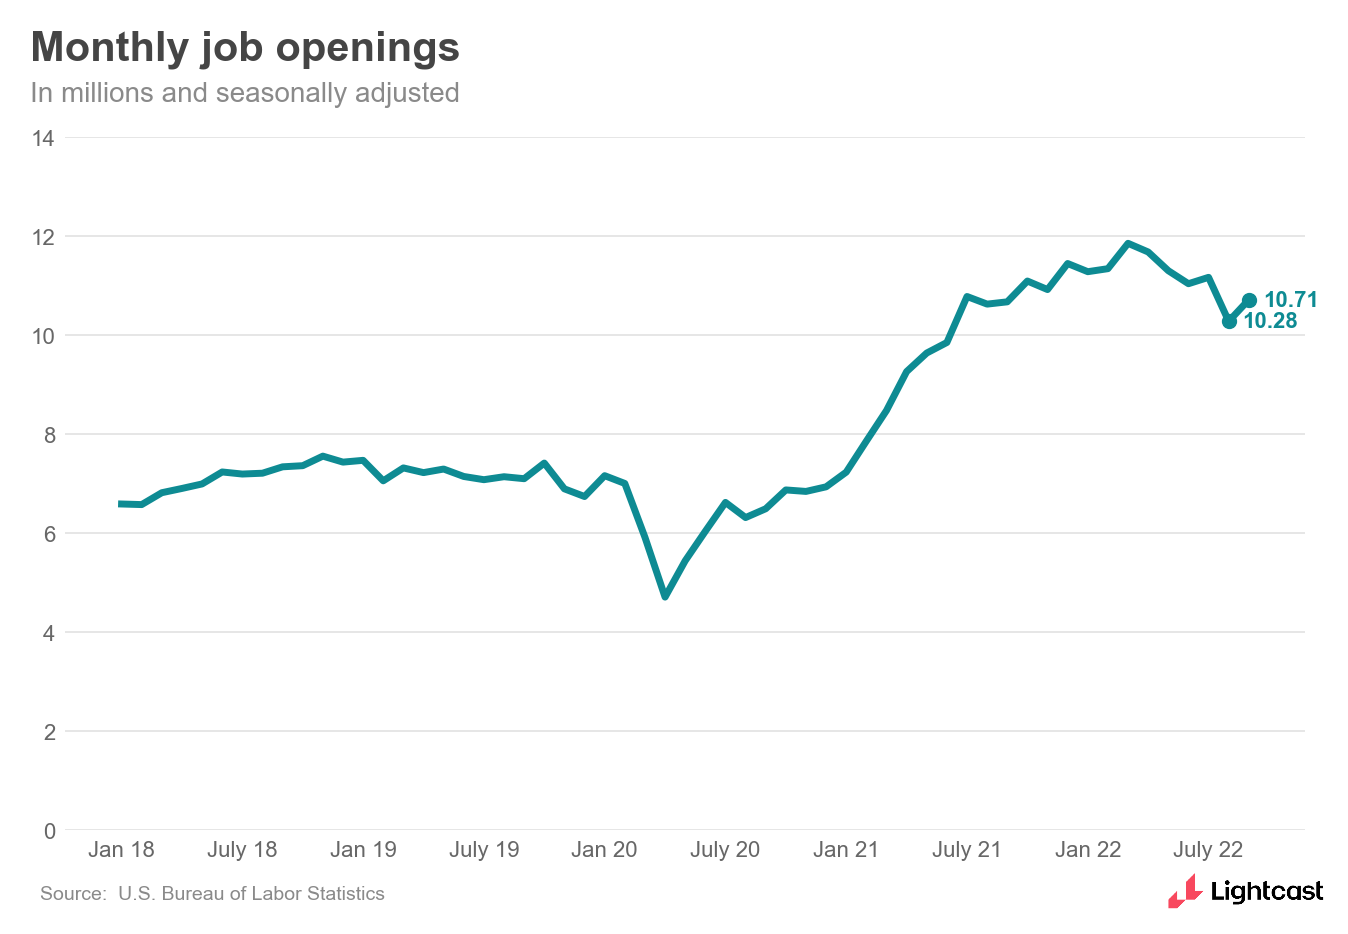 Line graph showing monthly job openings, up to 10.7 million from 10.28